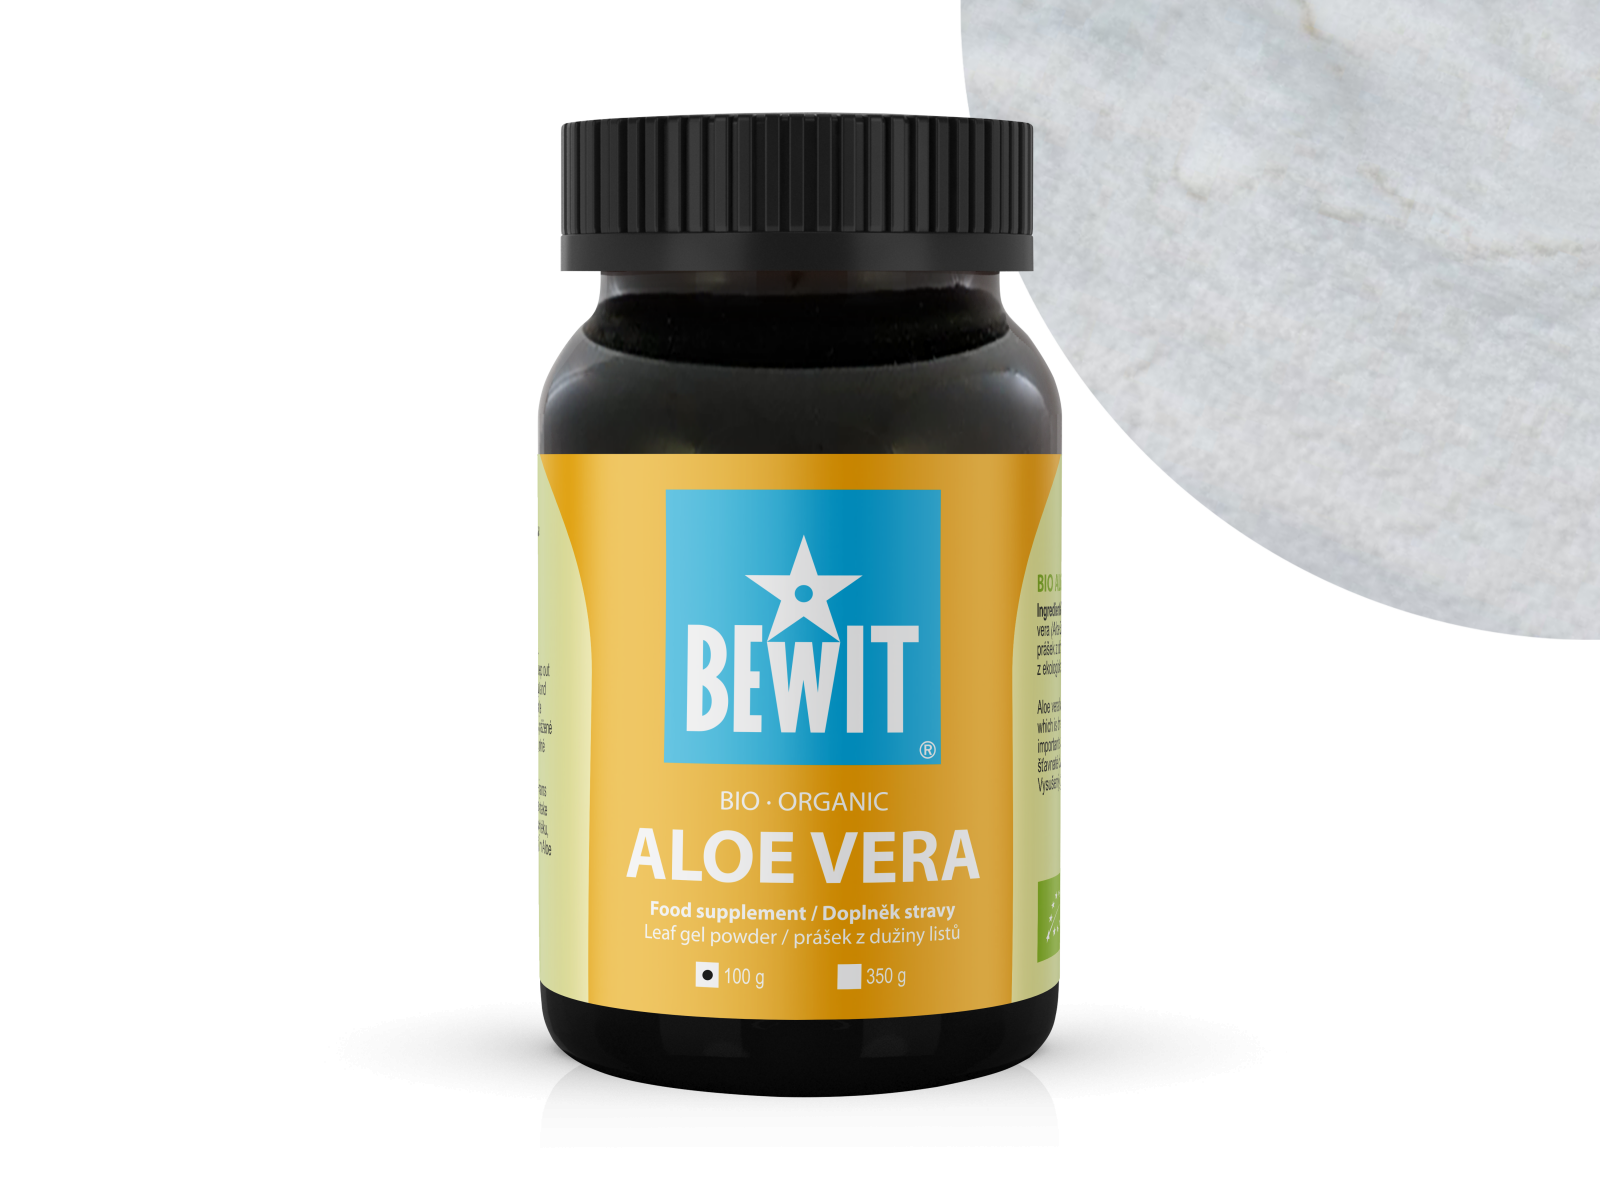 BEWIT ORGANIC ALOE VERA - This leaf pulp powder, made from Aloe vera, is a highly effective food supplement - 1